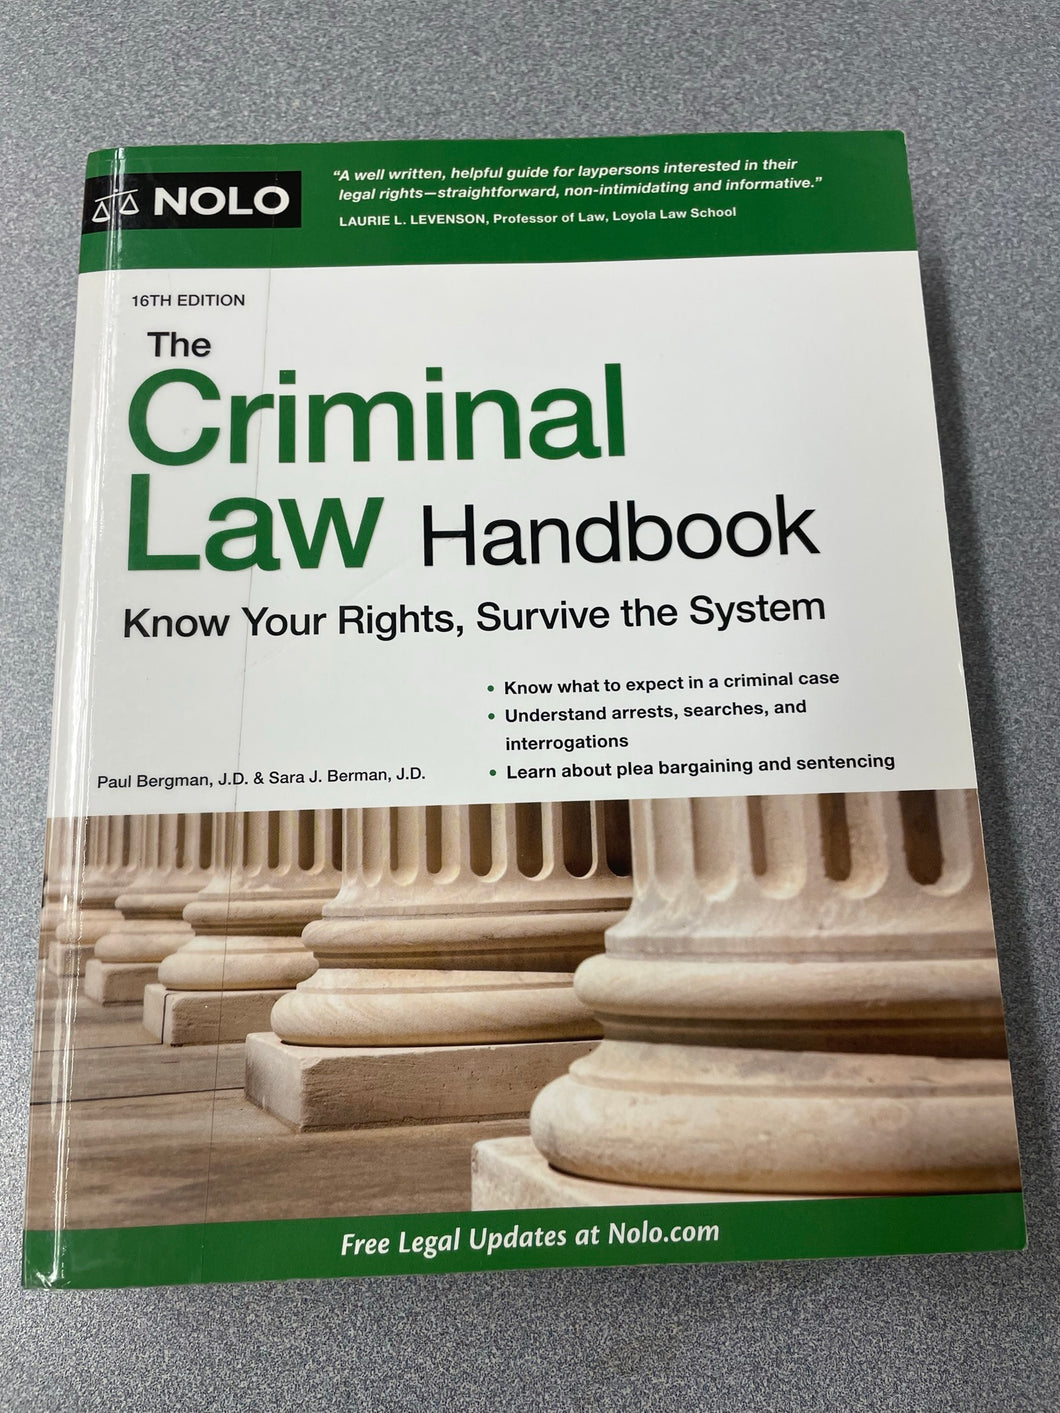 The Criminal Law Handbook: Know Your Rights, Survive the System, 16th Edition,  Bergman, Paul and Sara J. Berman [2020] LAW 10/22